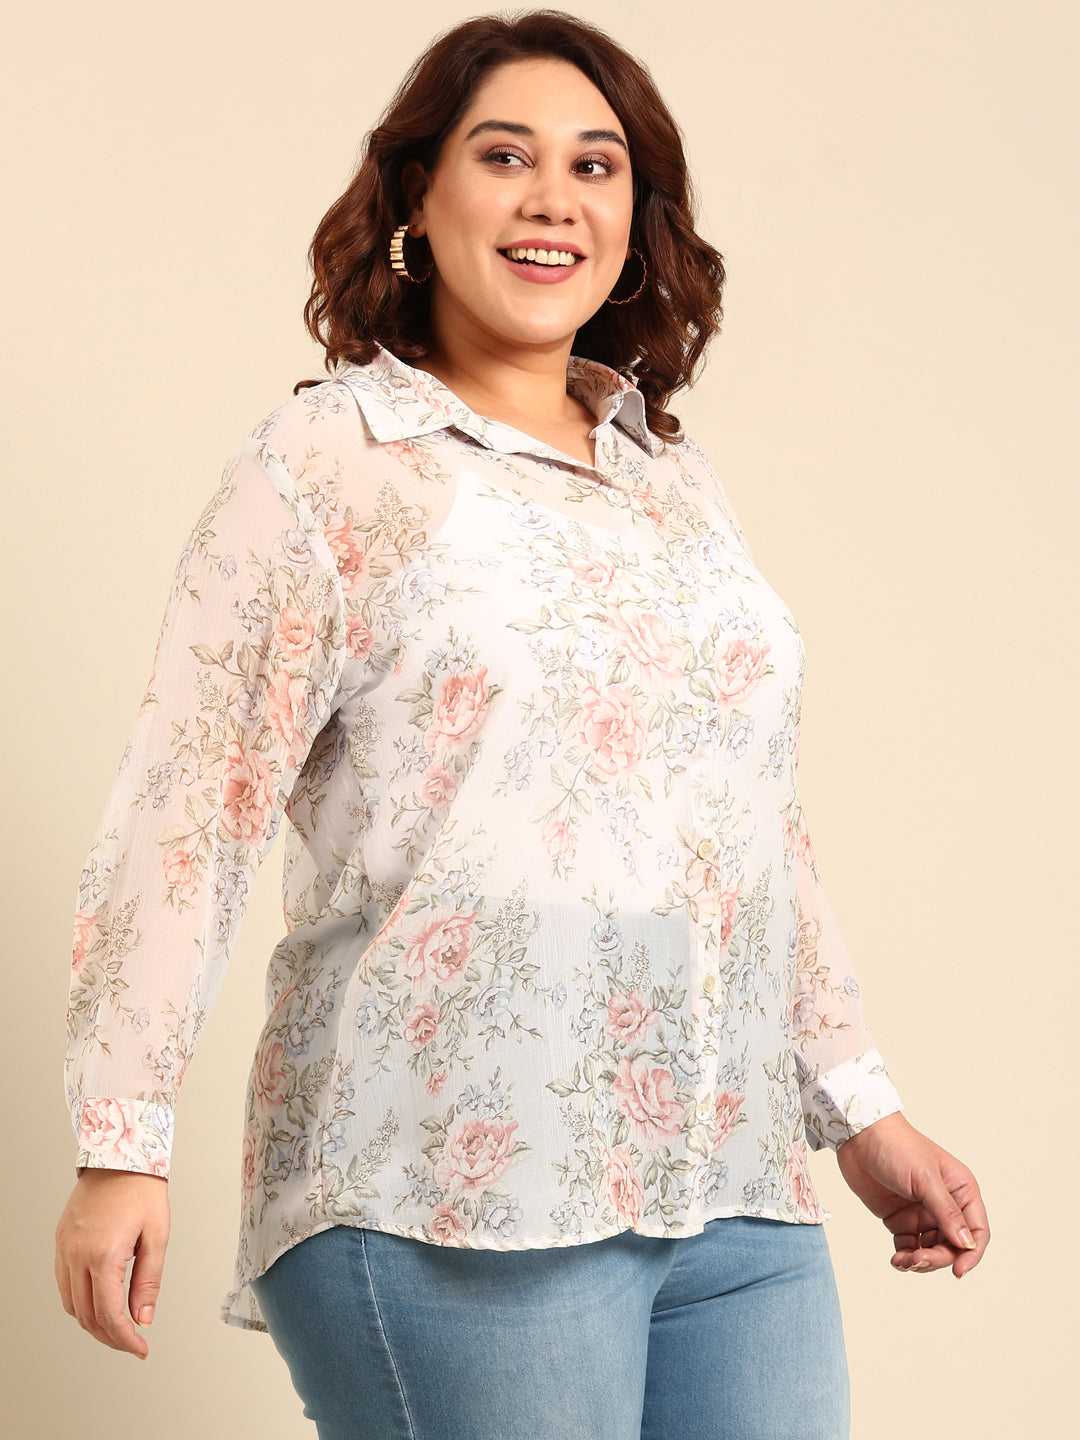 Explore new arrival plus size women's clothing – The Pink Moon